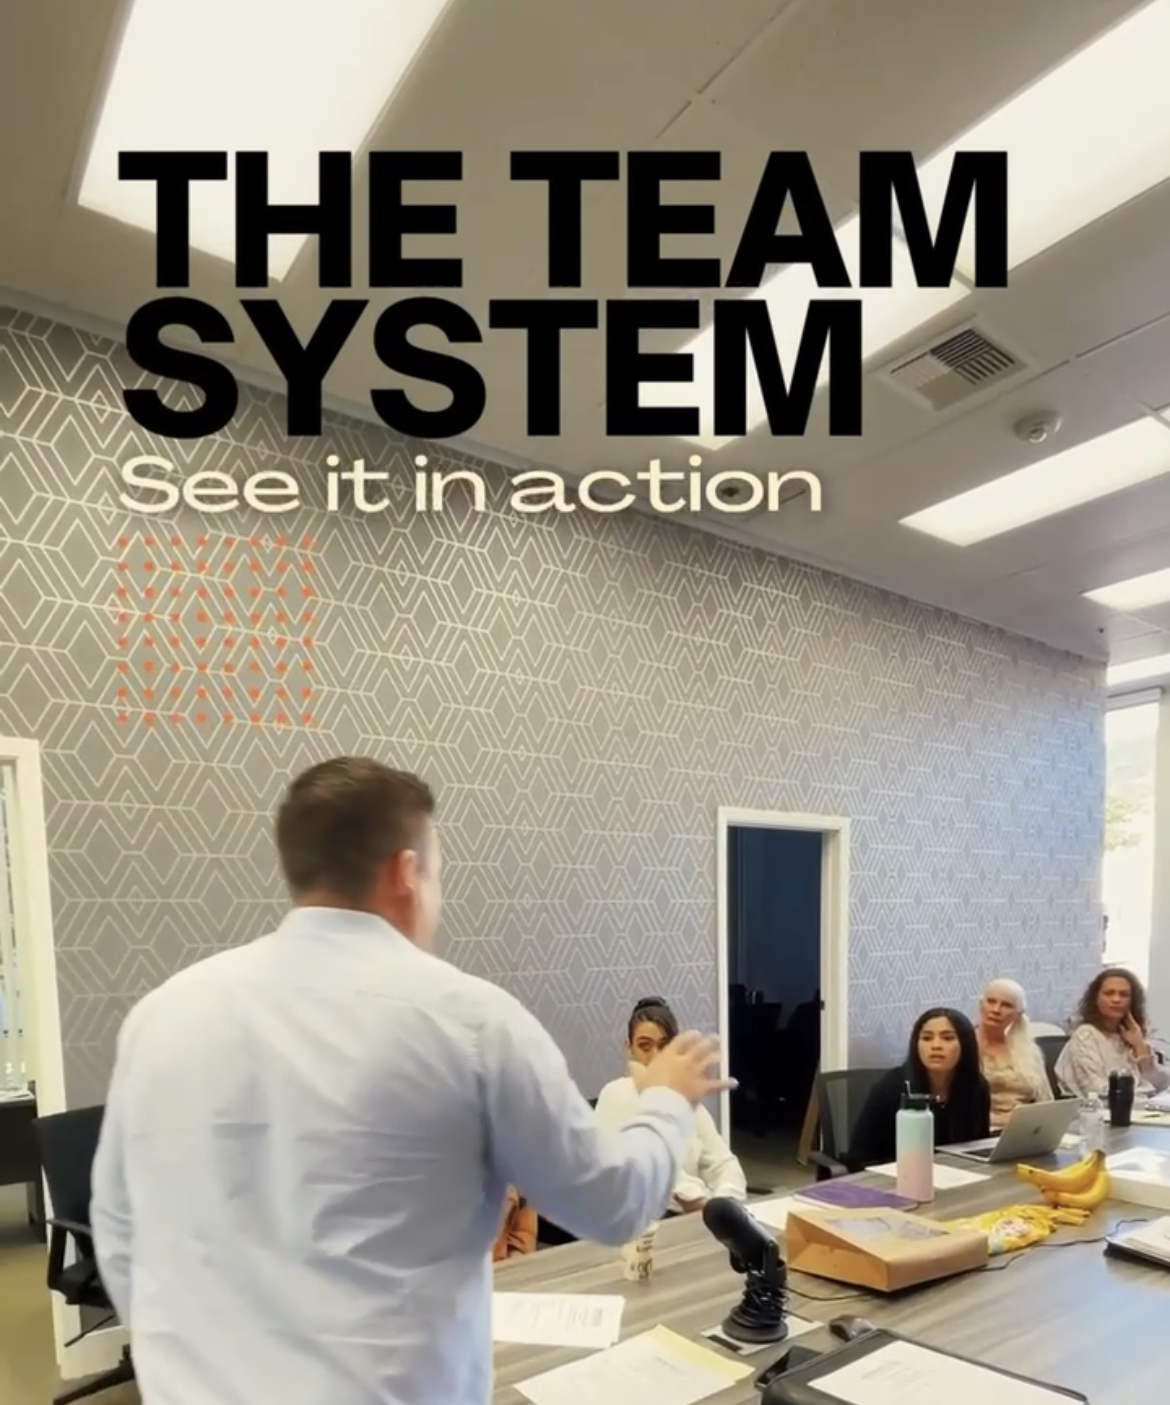 Watch how our Real Estate Team learns TOGETHER